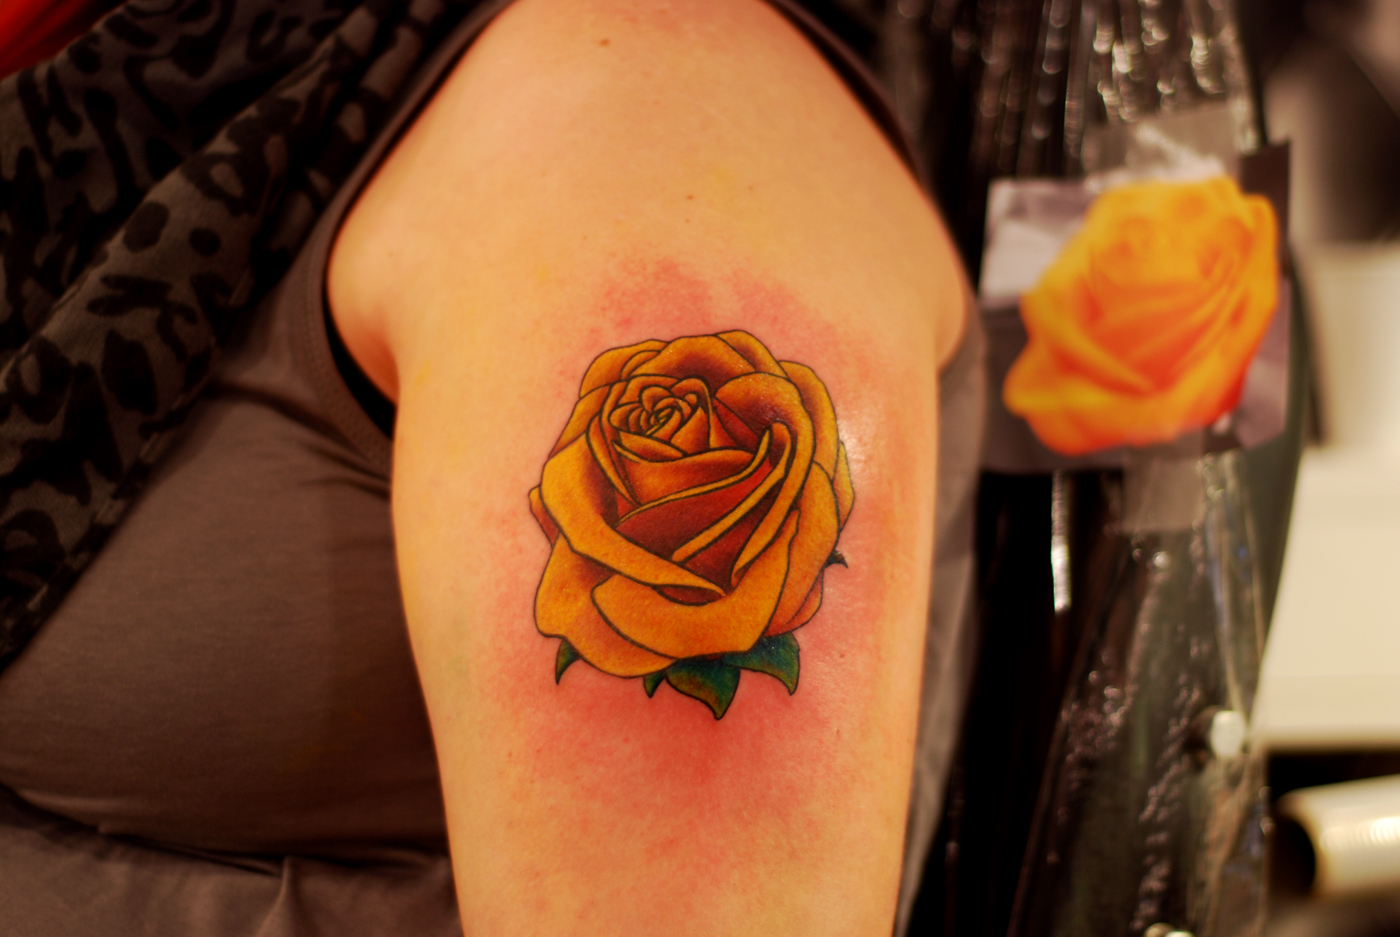 Black And Yellow Meaning 9 Desktop Wallpaper - Yellow Rose Tattoo On Shoulder - HD Wallpaper 